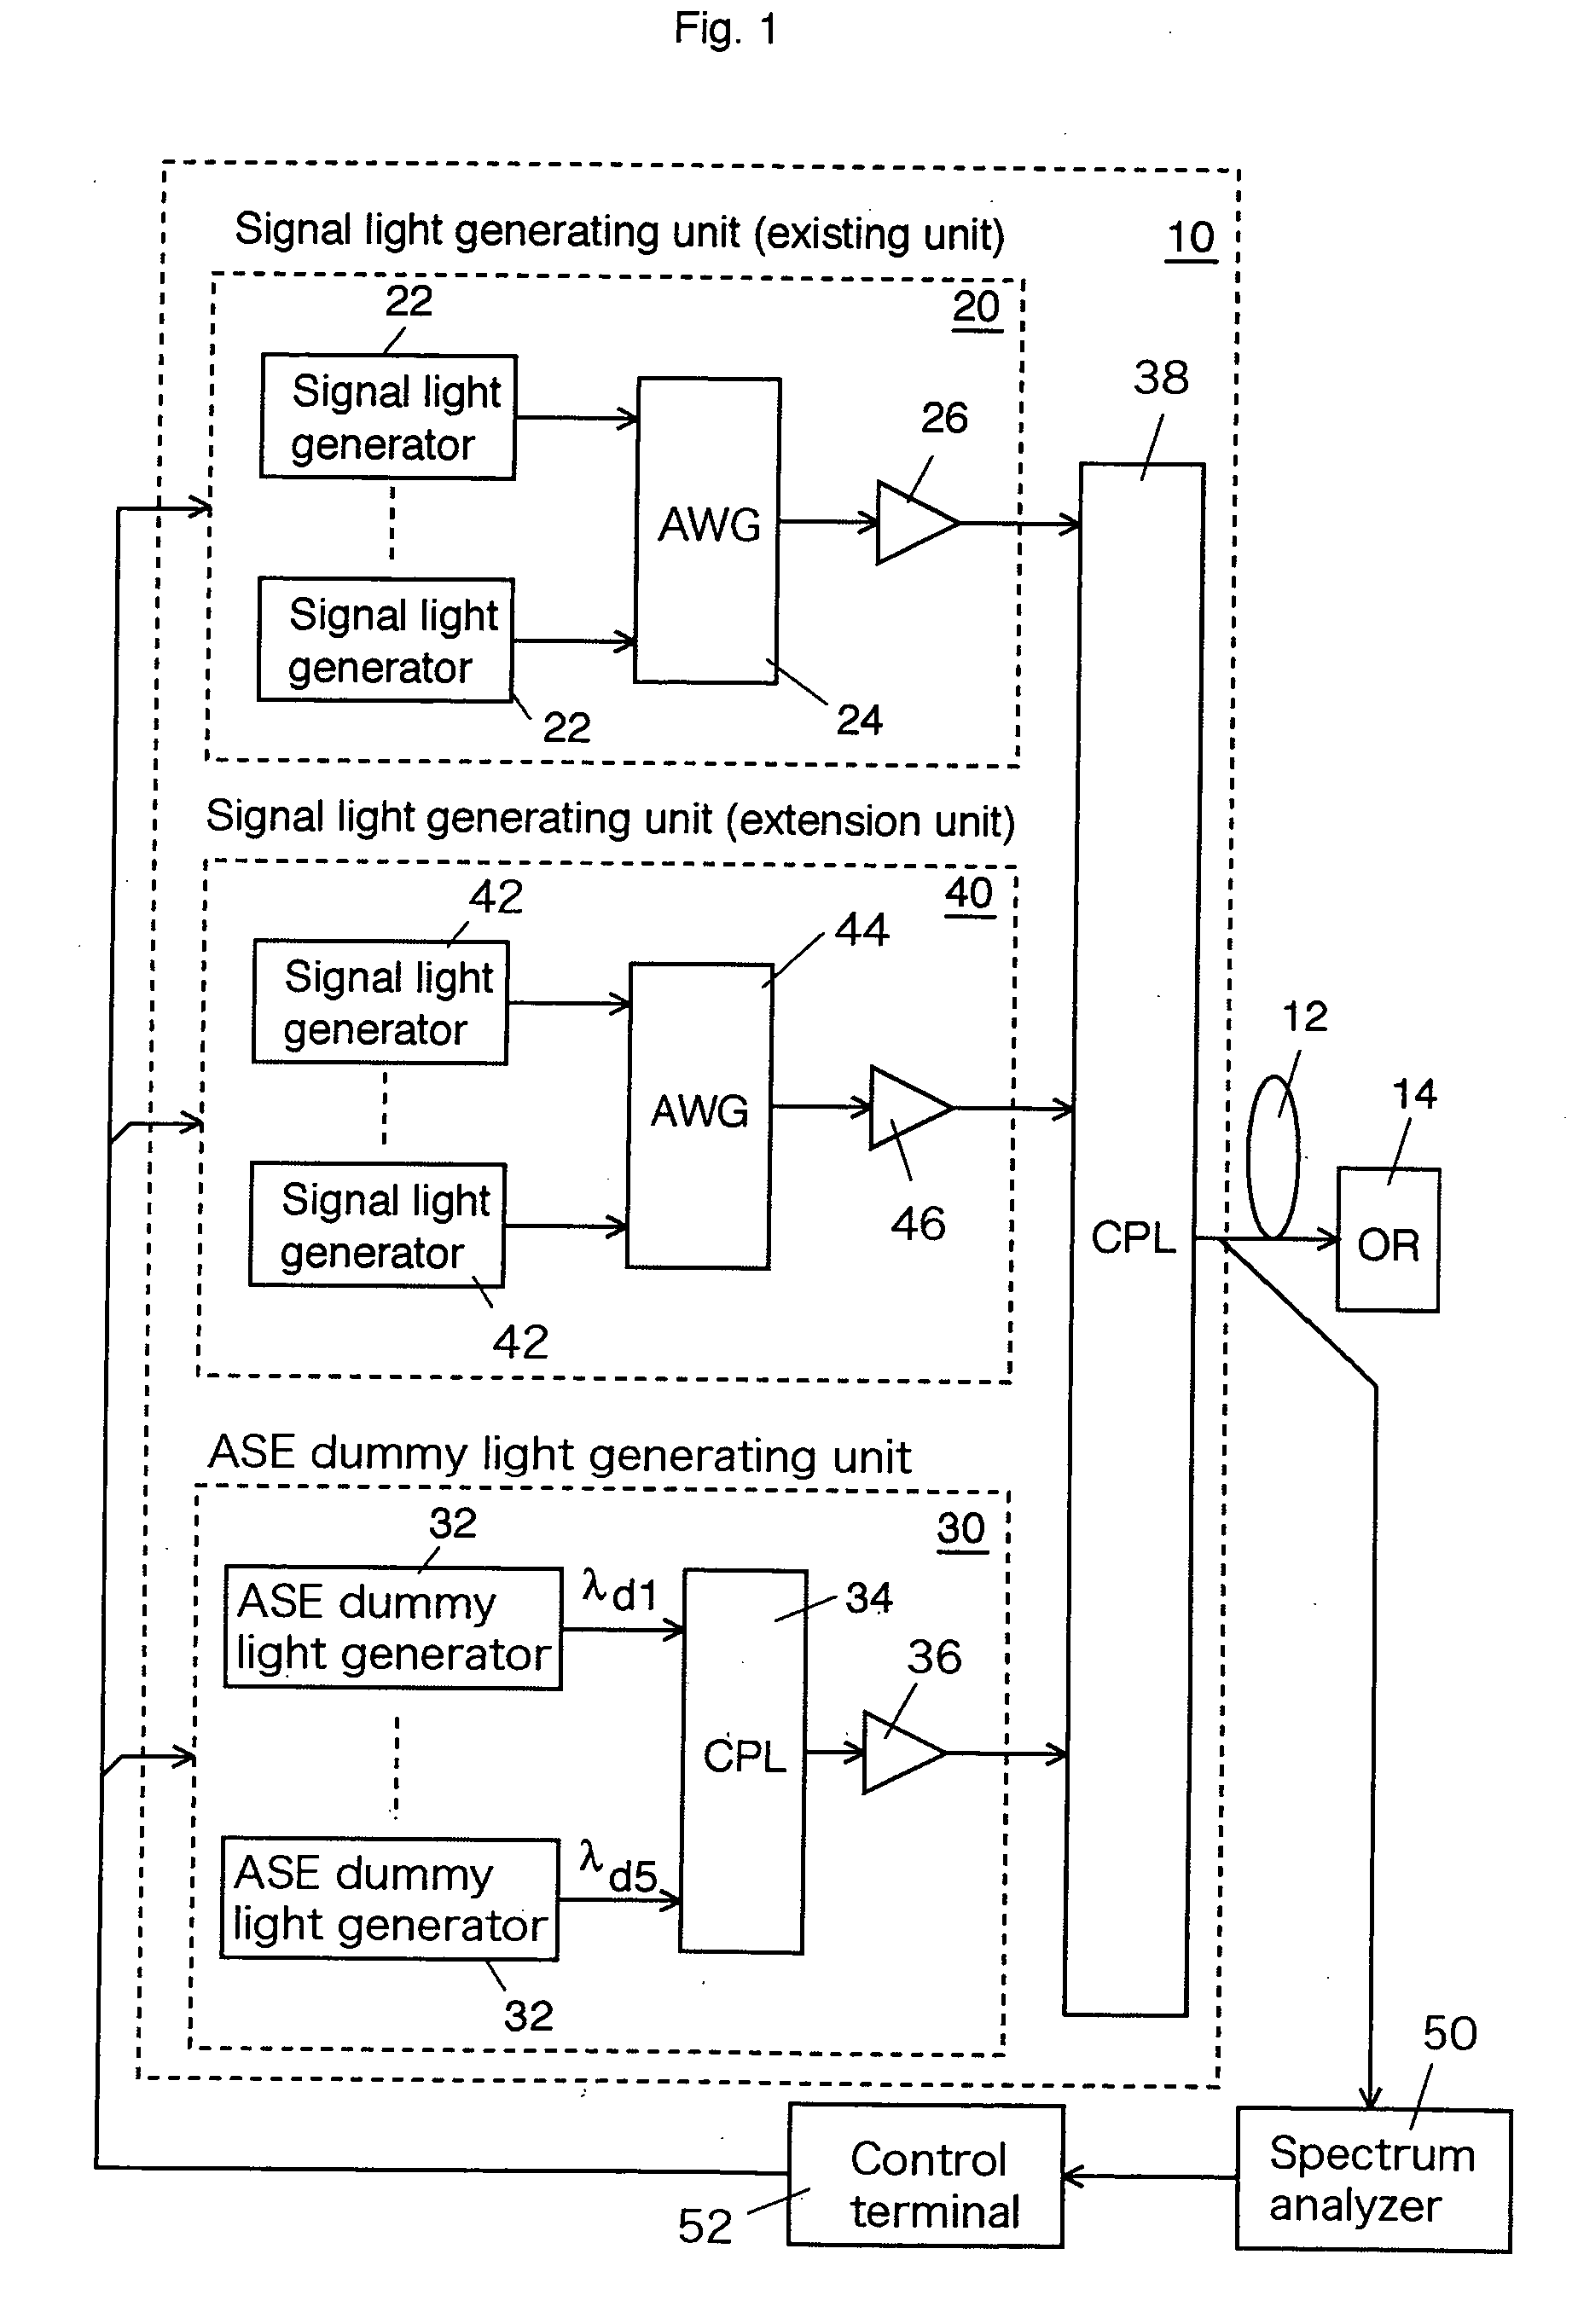 Method for upgrading an optical transmission system and an optical transmitter